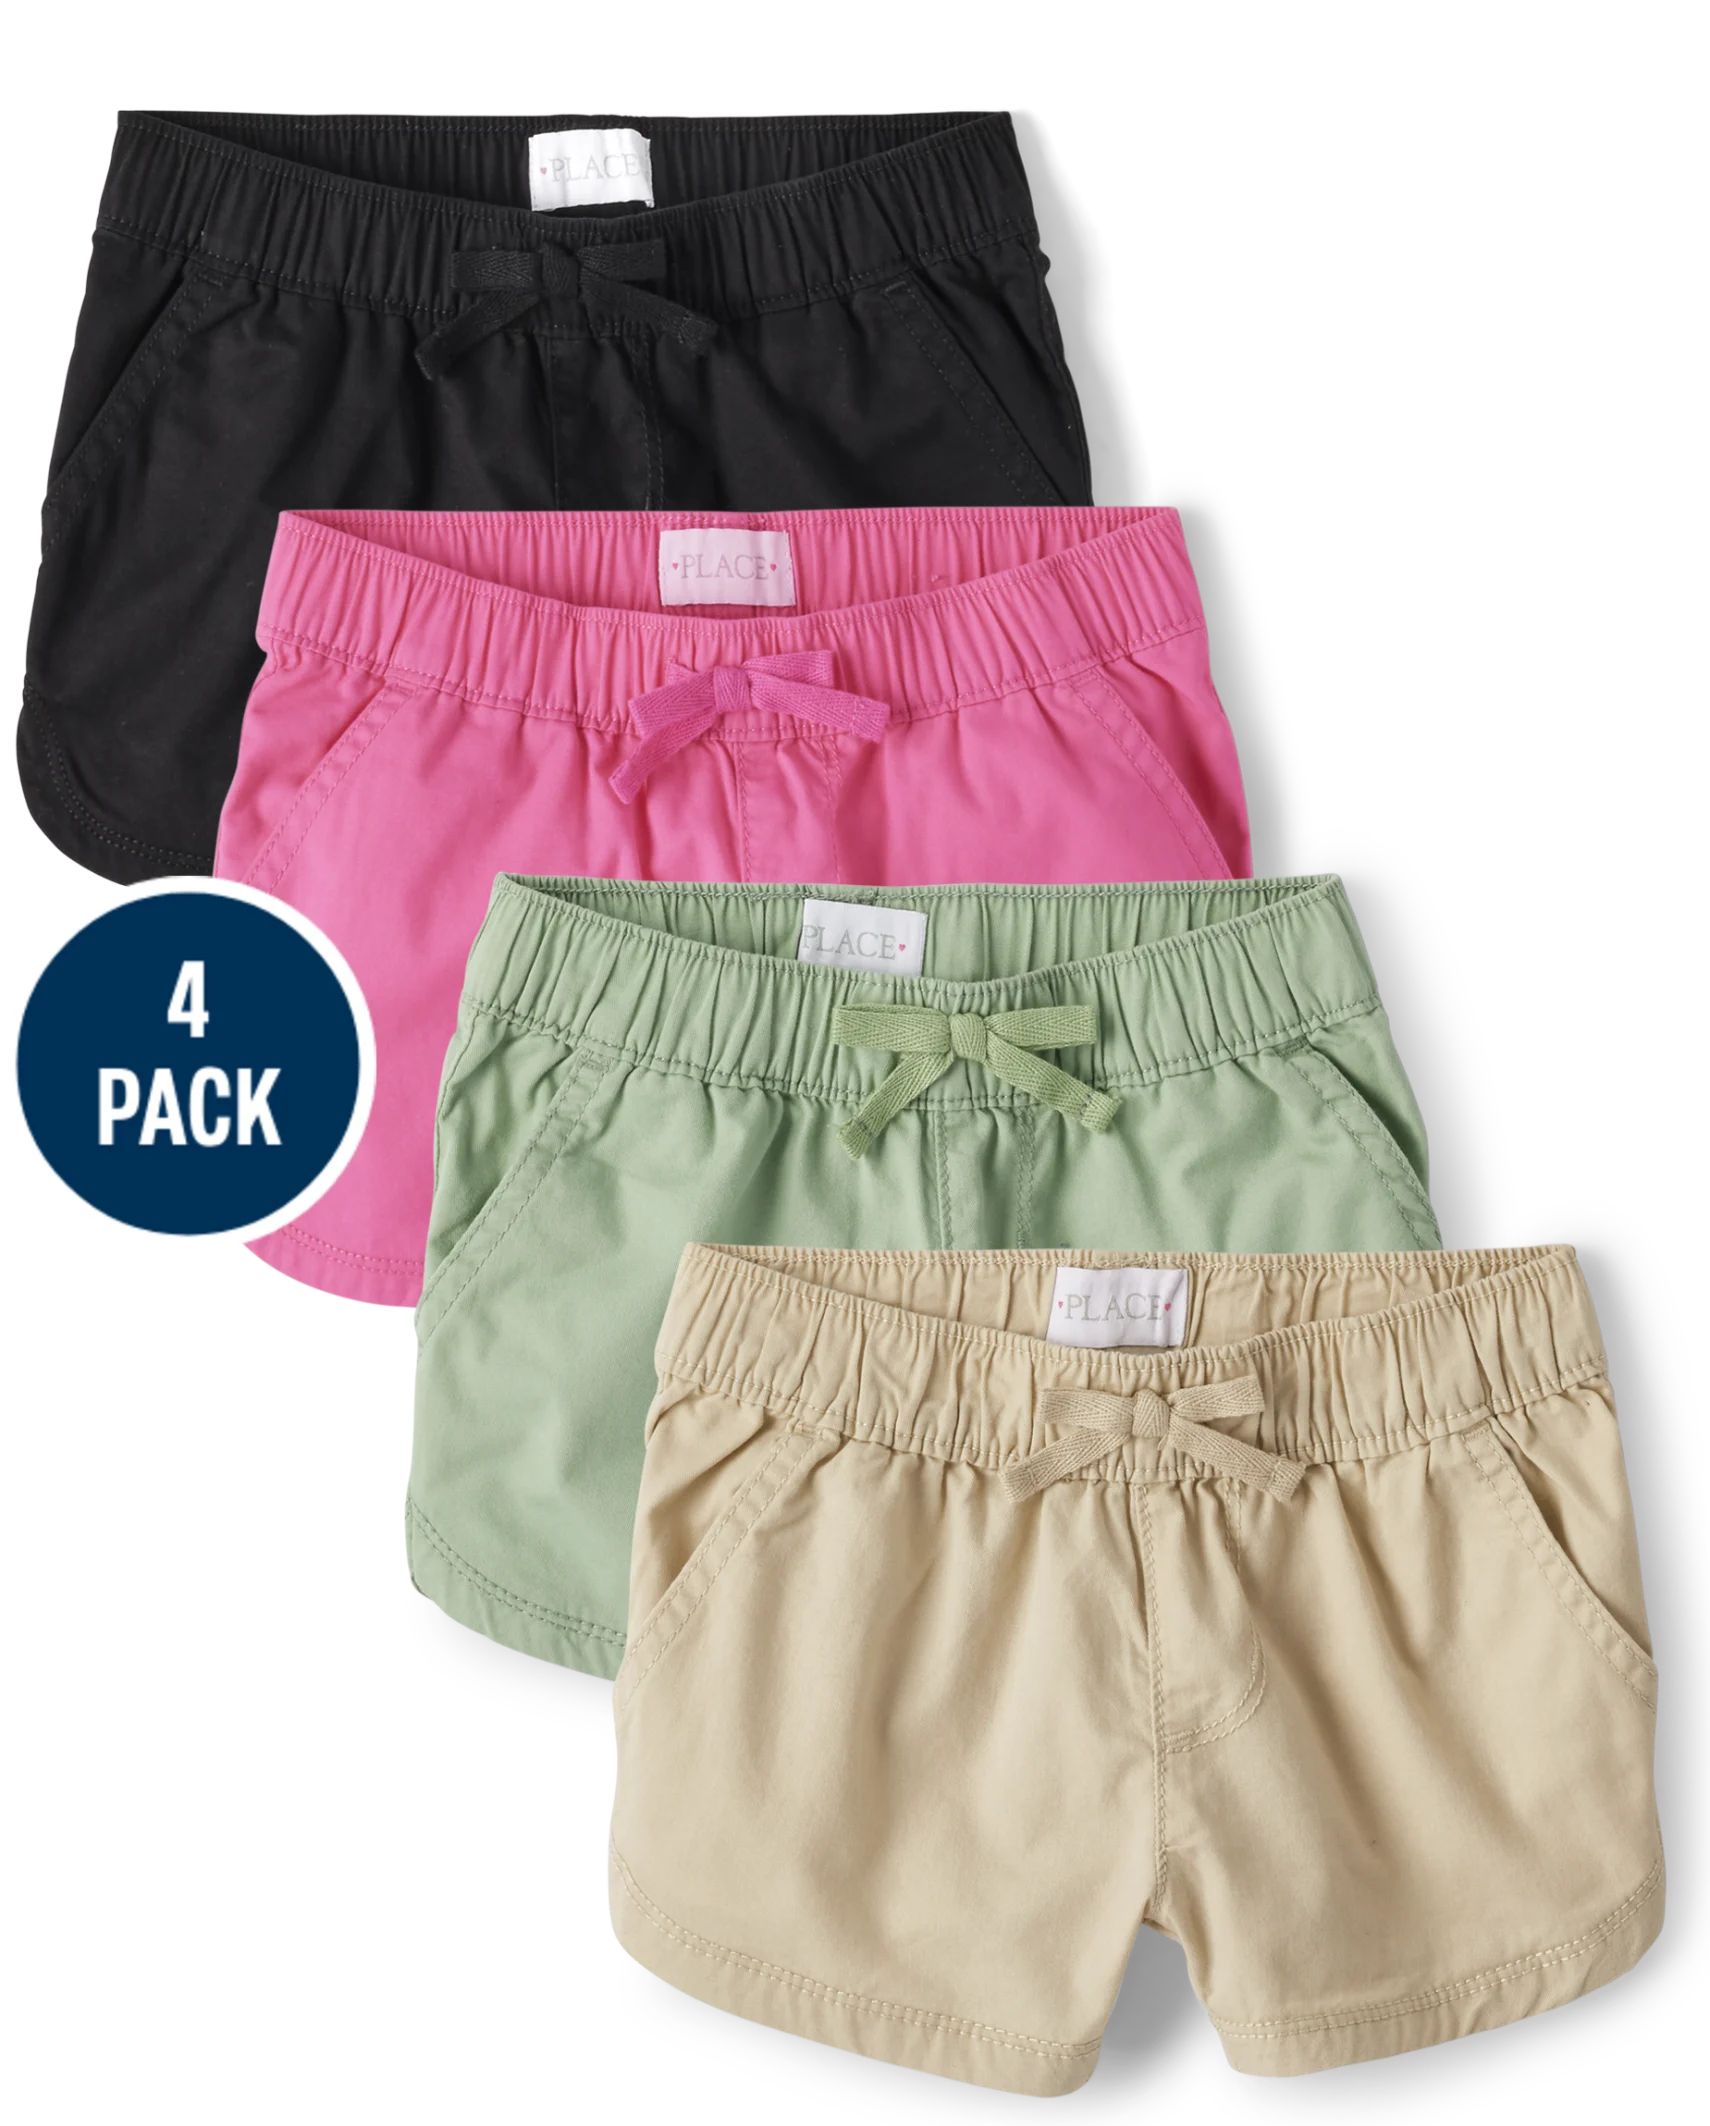 Girls Twill Pull On Shorts 4-Pack | The Children's Place  - MULTI CLR | The Children's Place